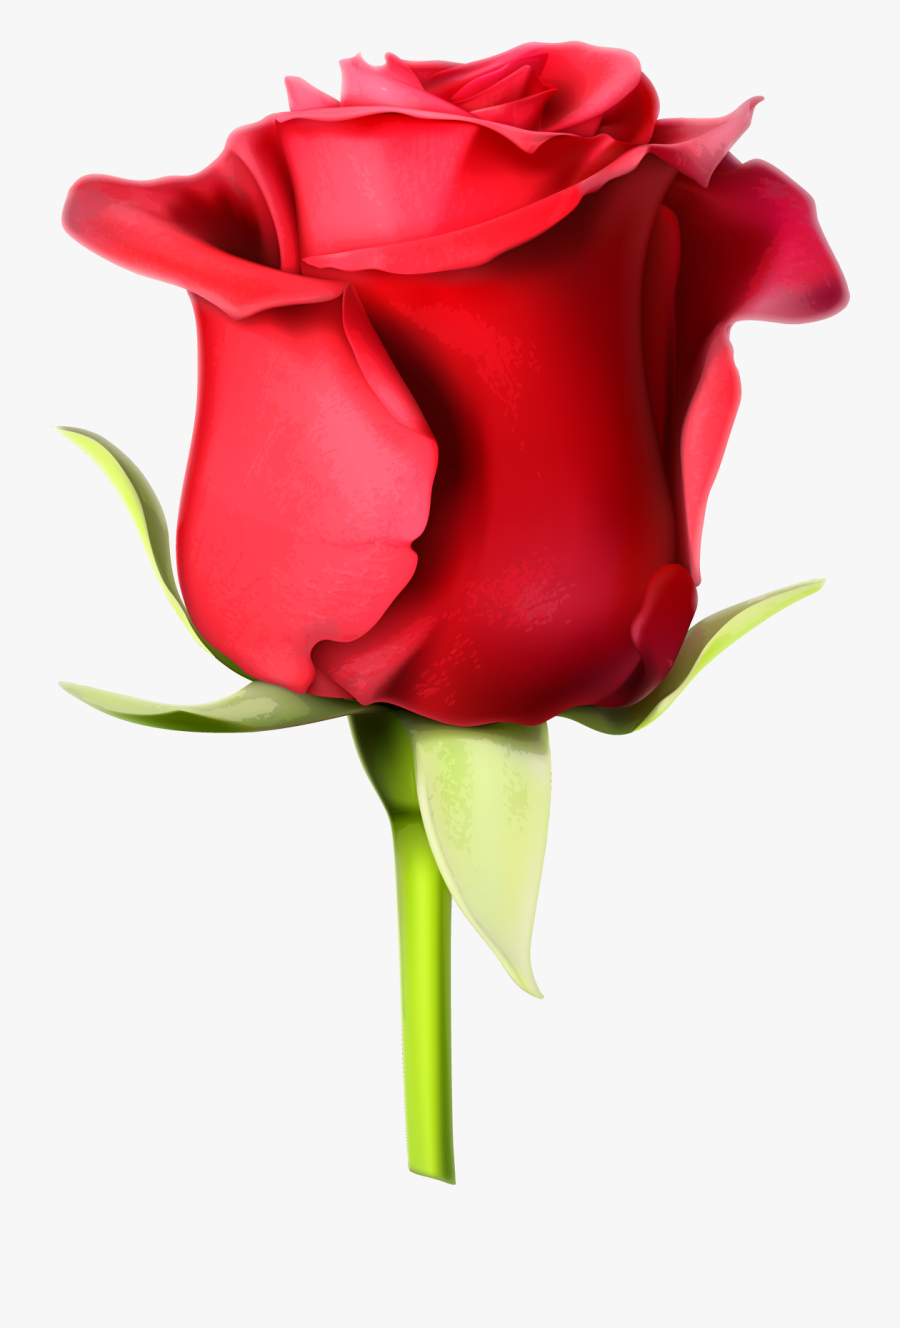 Rose Images Hd Download Clipart , Png Download - Rose Full Hd Images Download , HD Wallpaper & Backgrounds